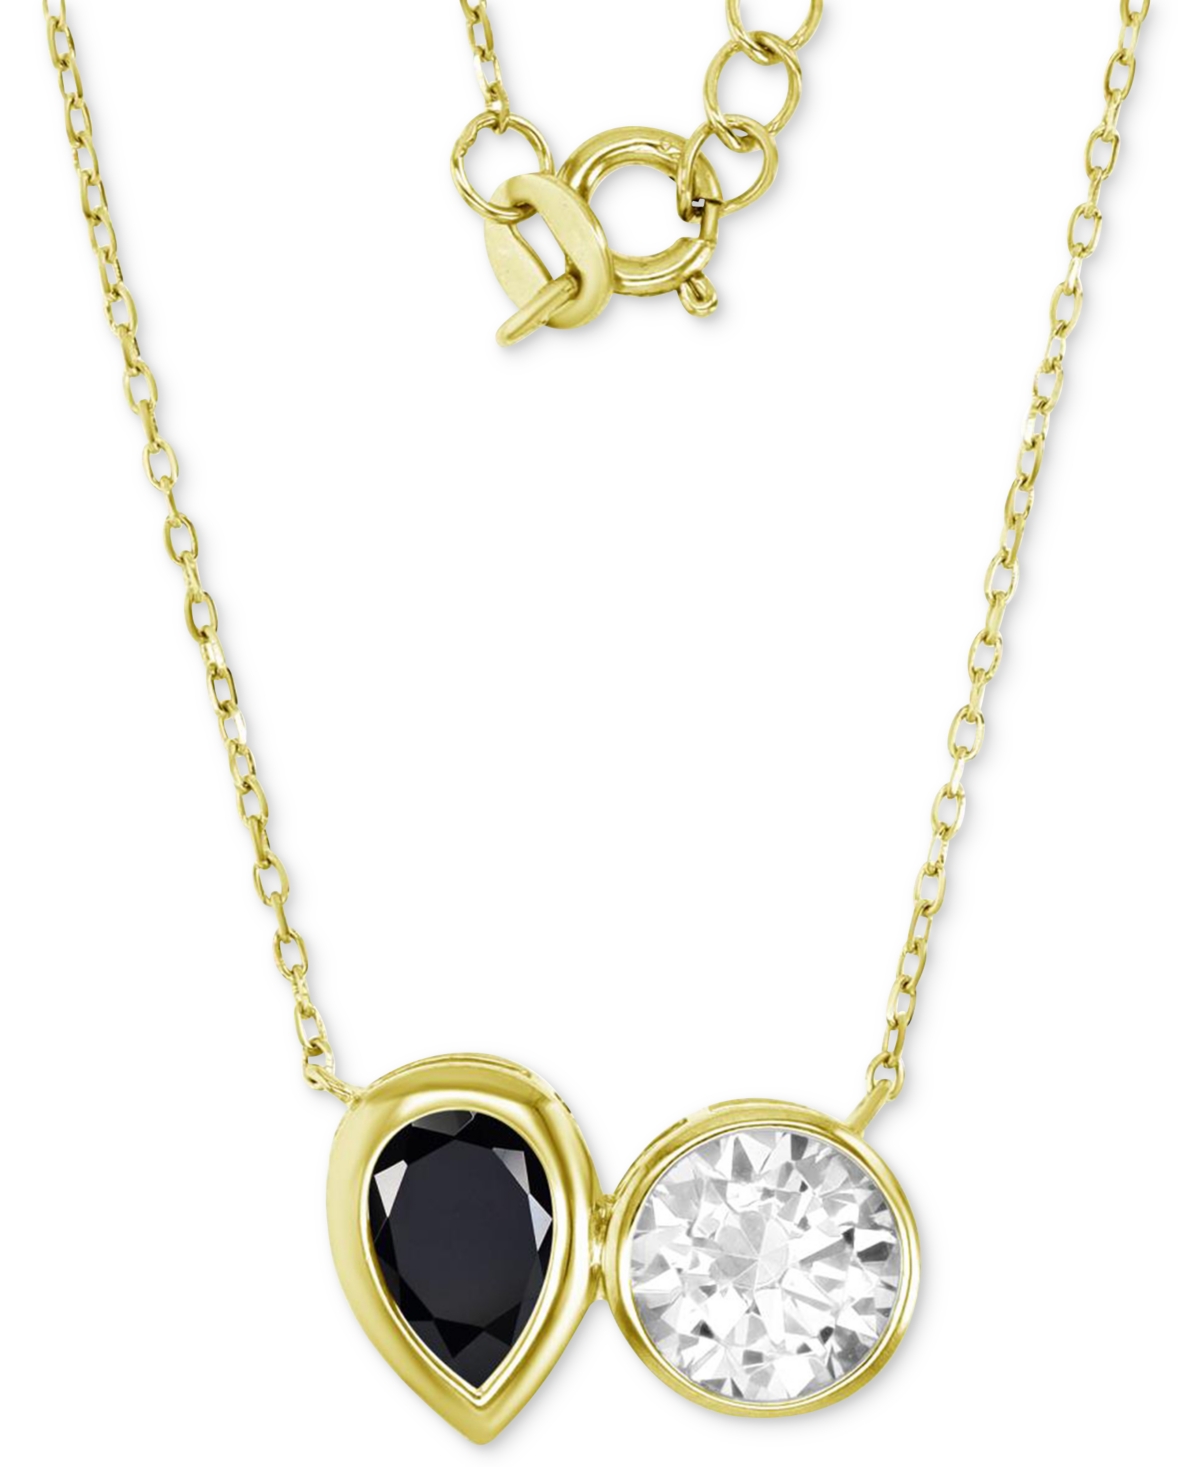 Macy's Cubic Zirconia White & Black Two-stone Necklace In 14k Gold-plated Sterling Silver, 18" + 2" Extende